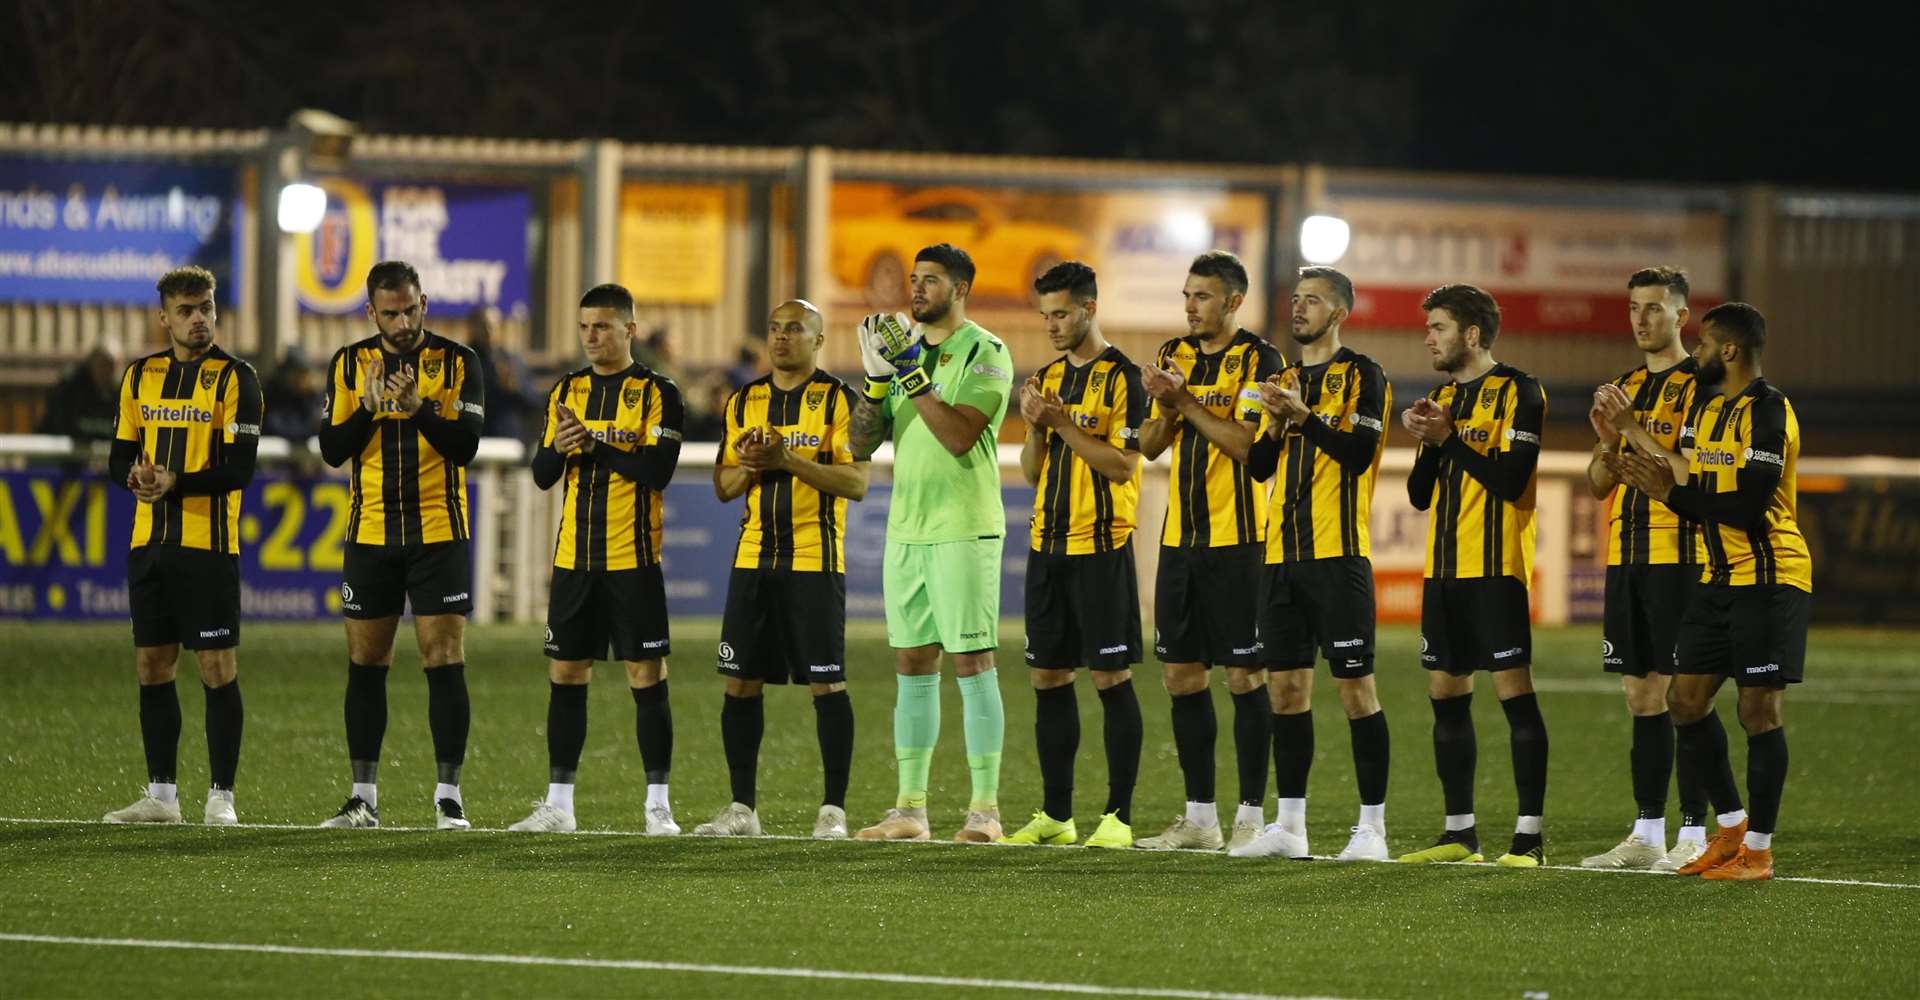 Maidstone players pay tribute to England 1966 hero Gordon Banks with a minute's applause before kick-off Picture: Andy Jones